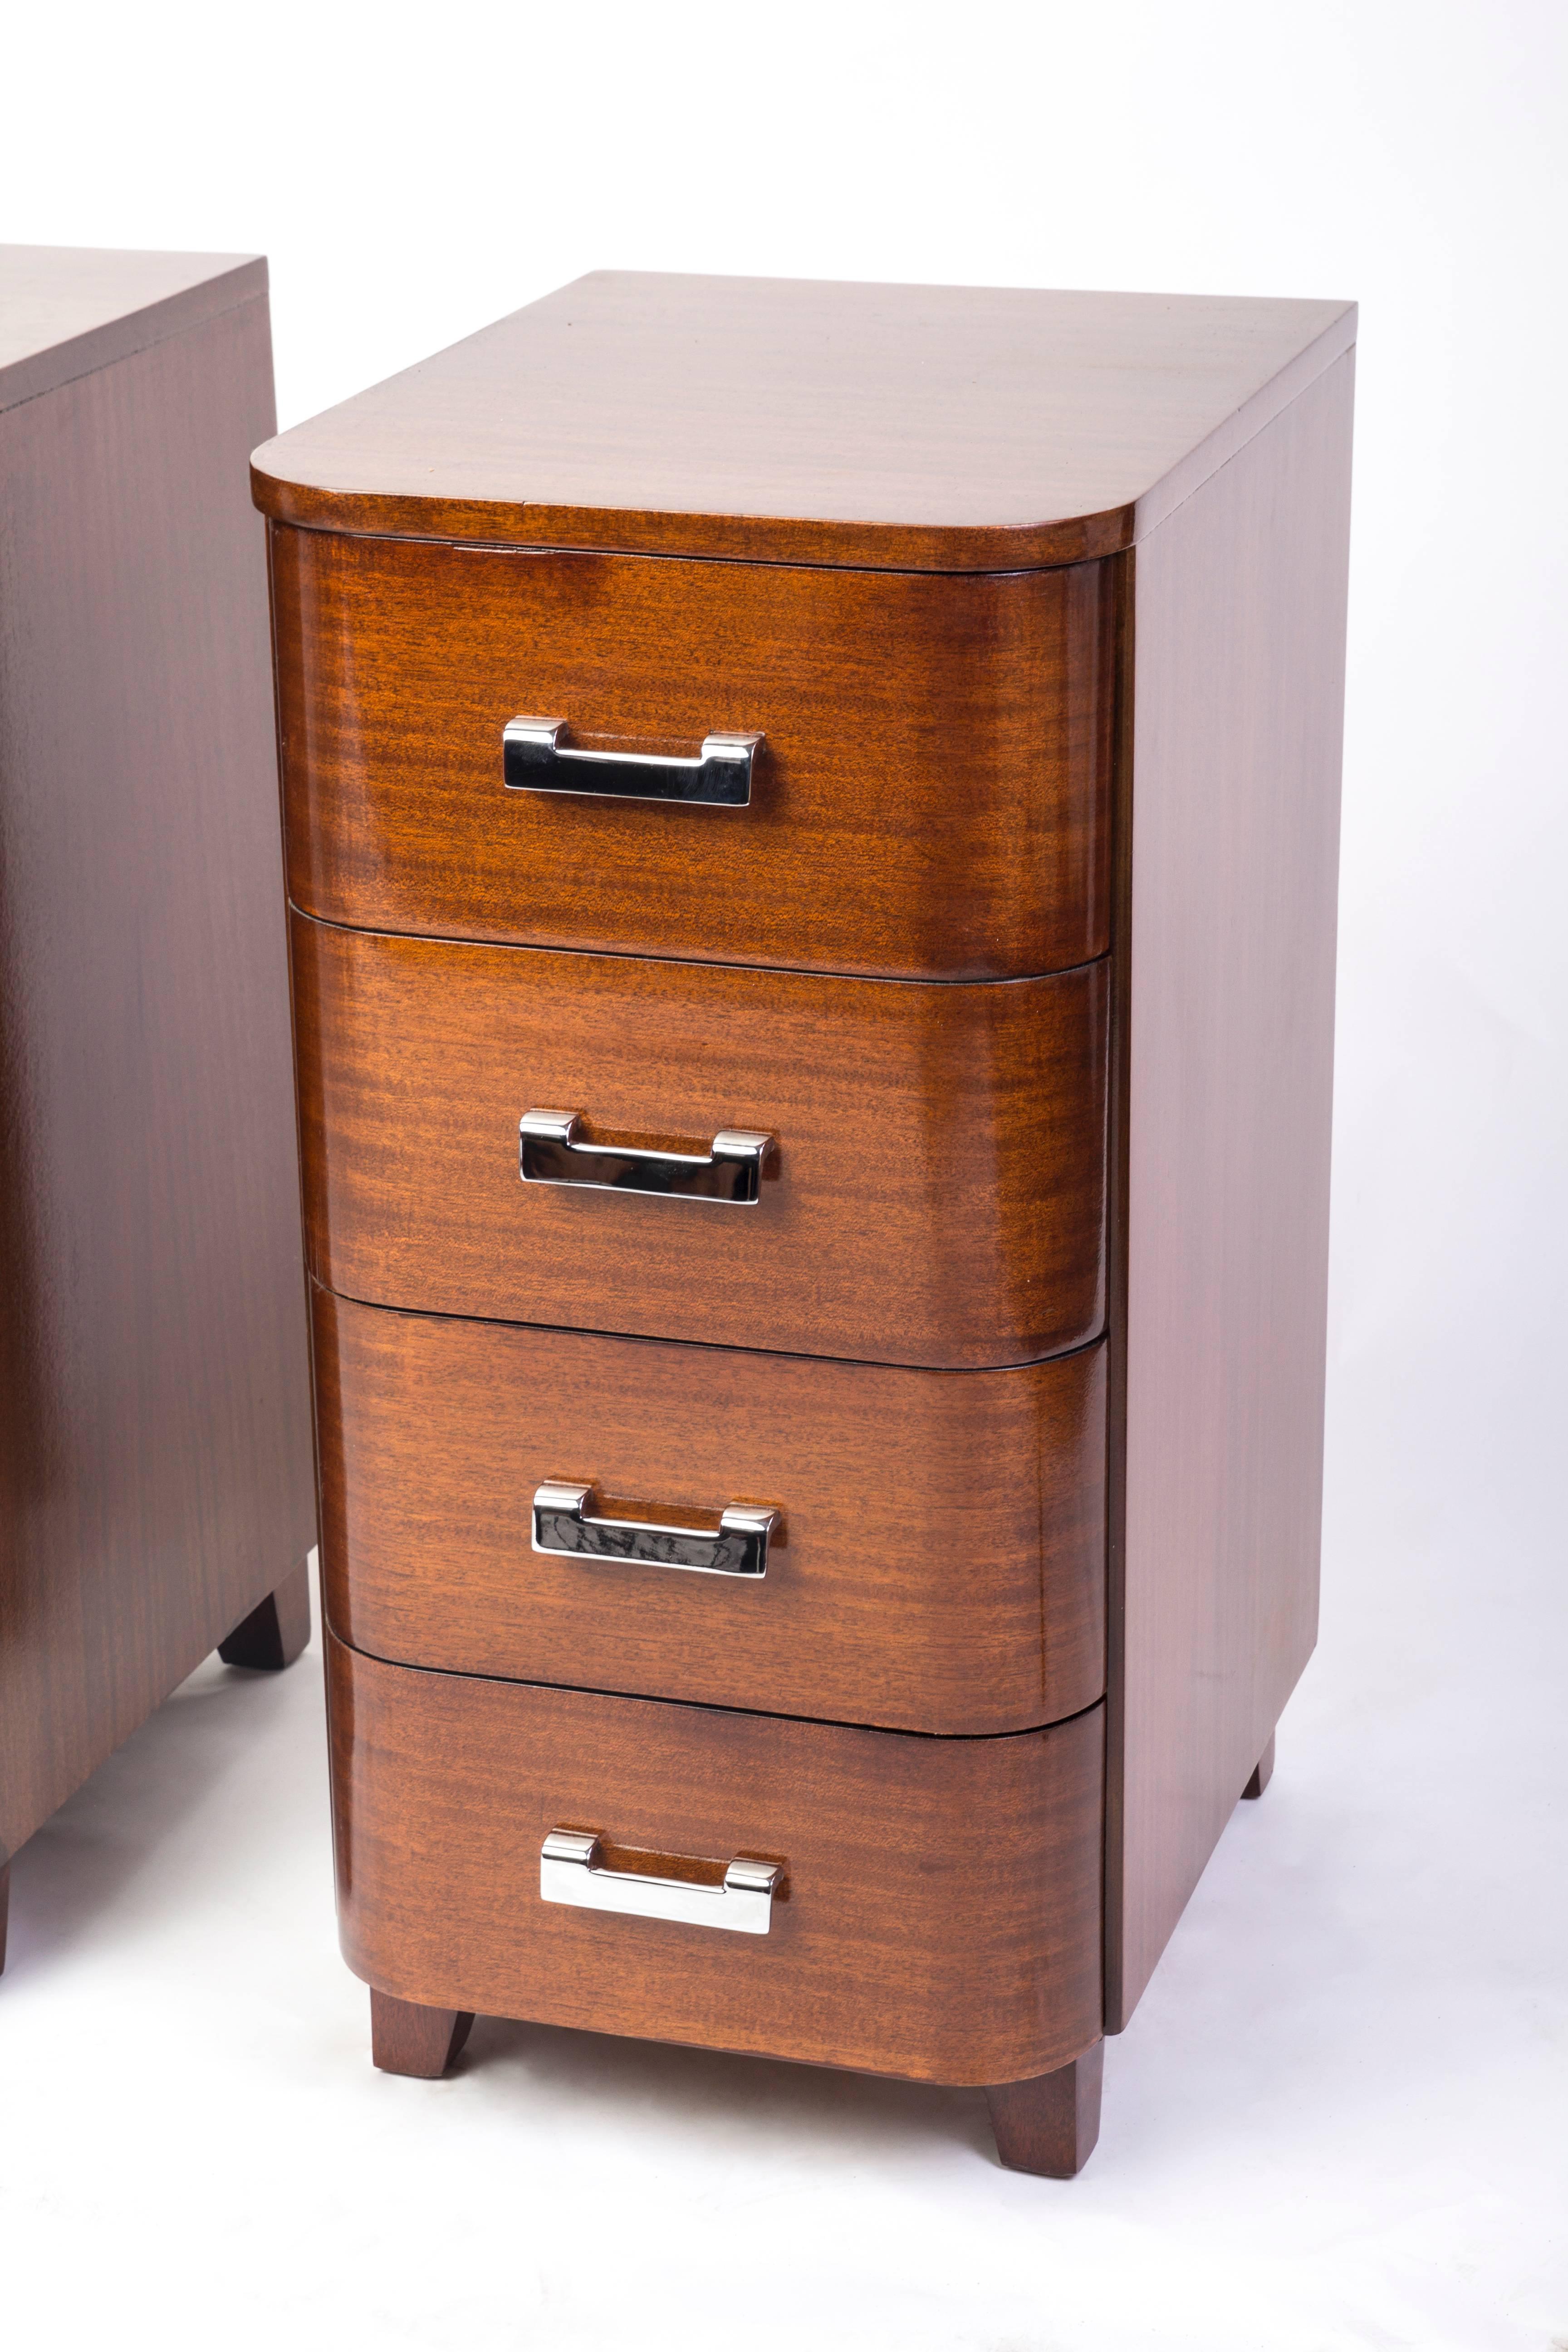 Pair of tall Art Deco streamline nightstands with four drawers in solid mahogany and nickel-plated metal hardware.